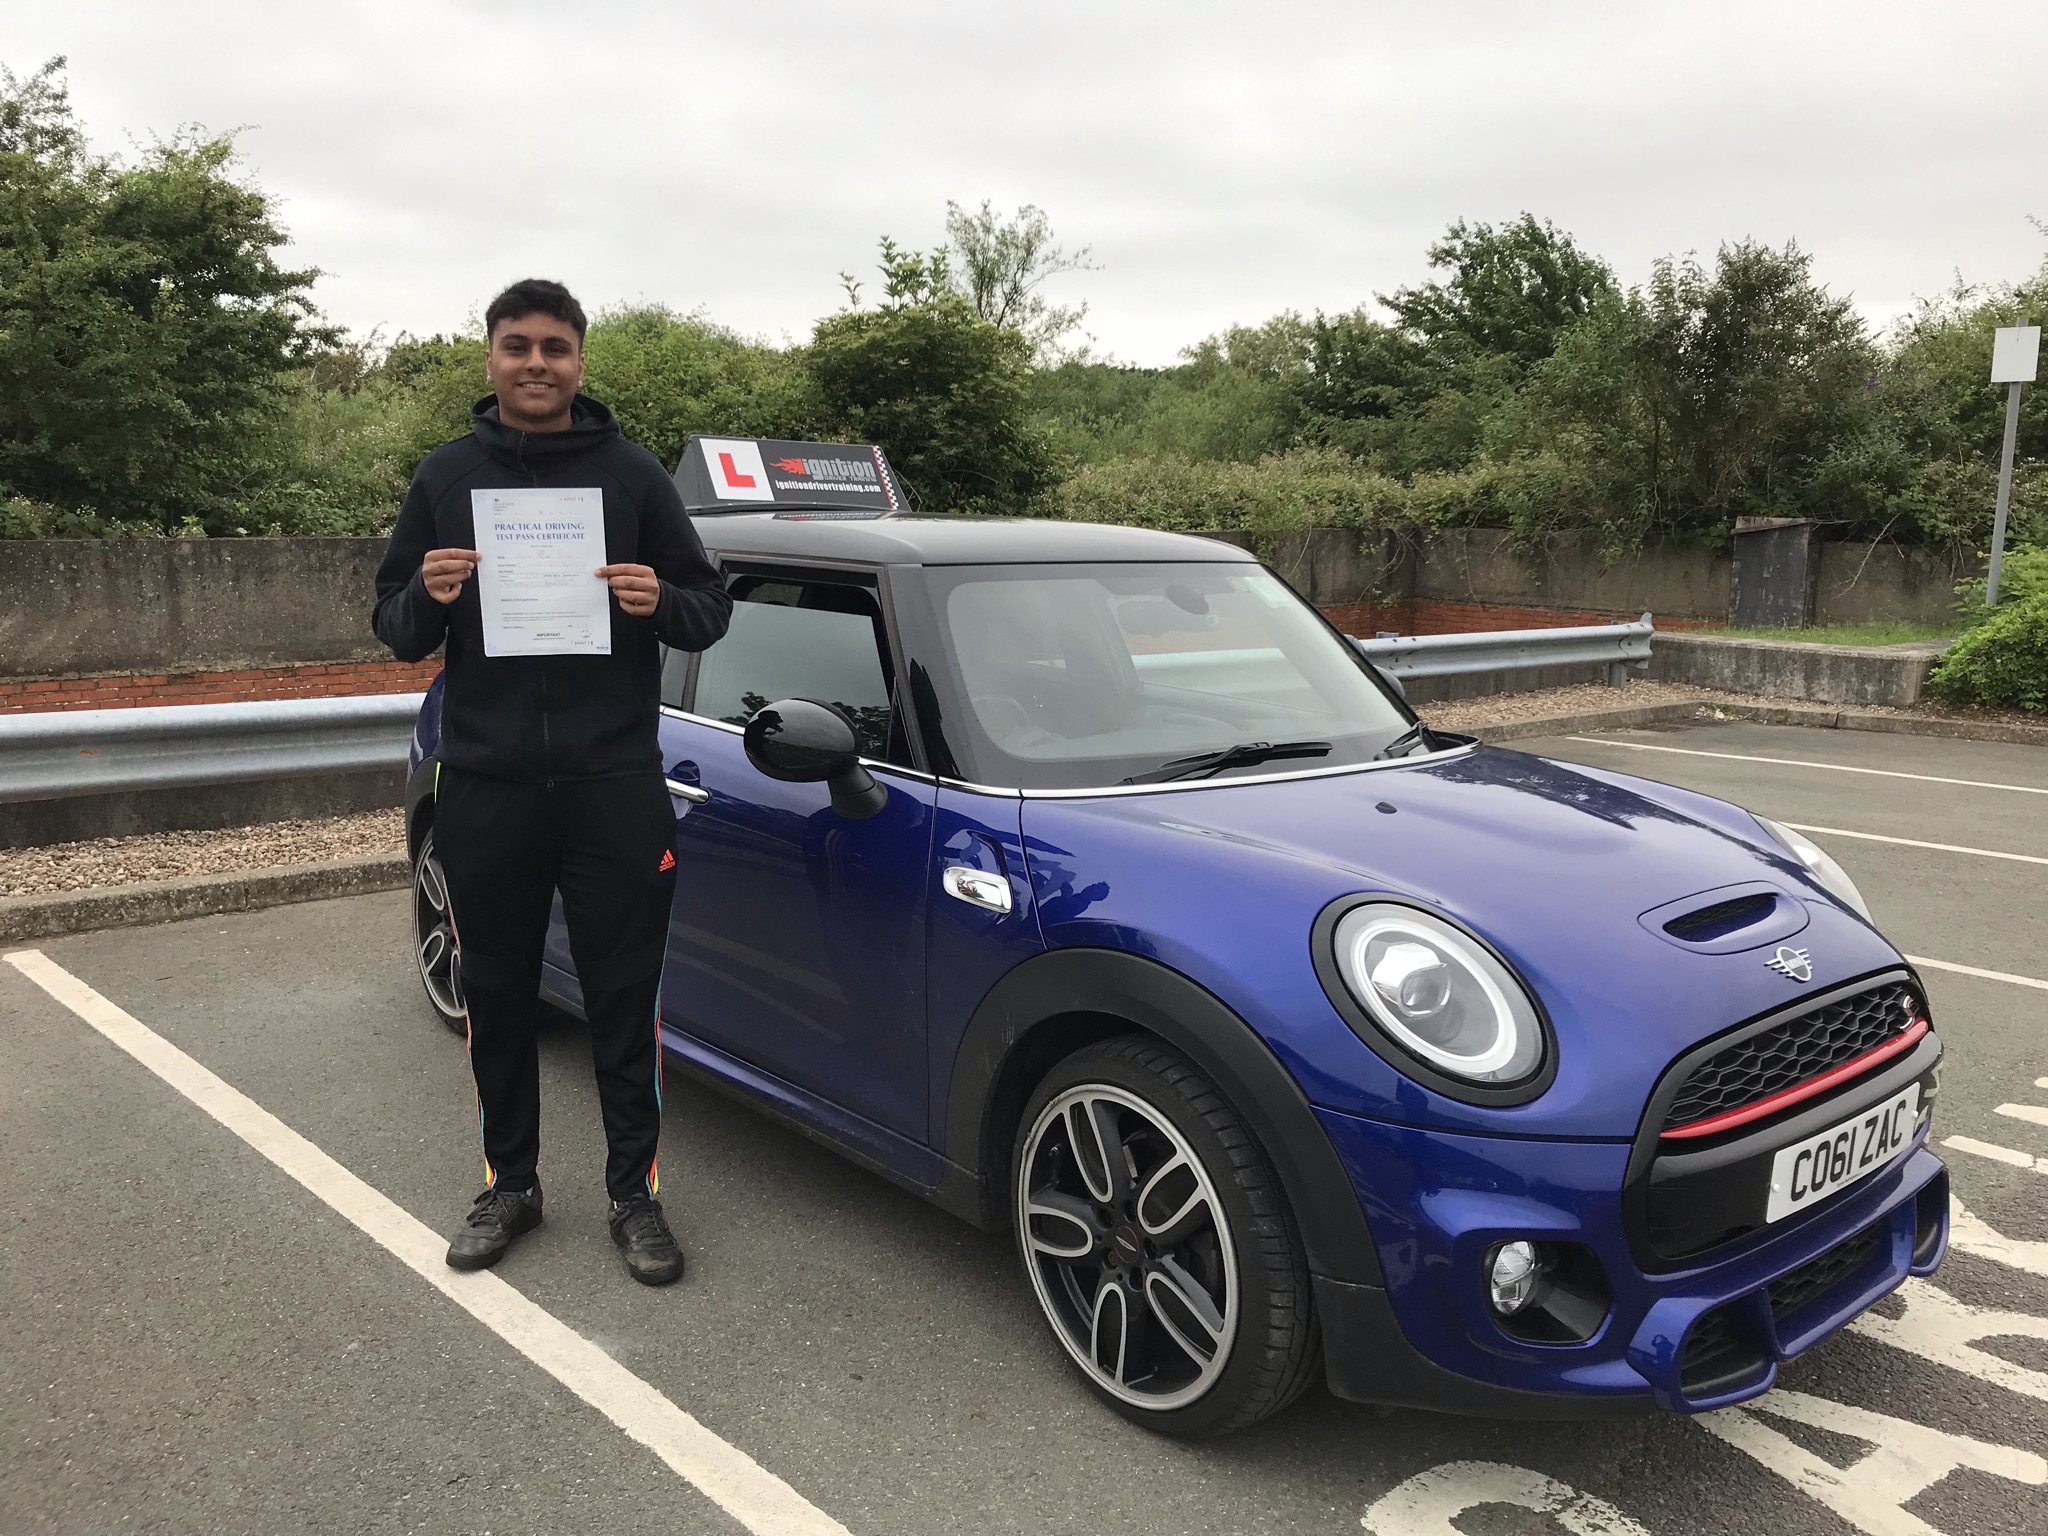 David passed first time!